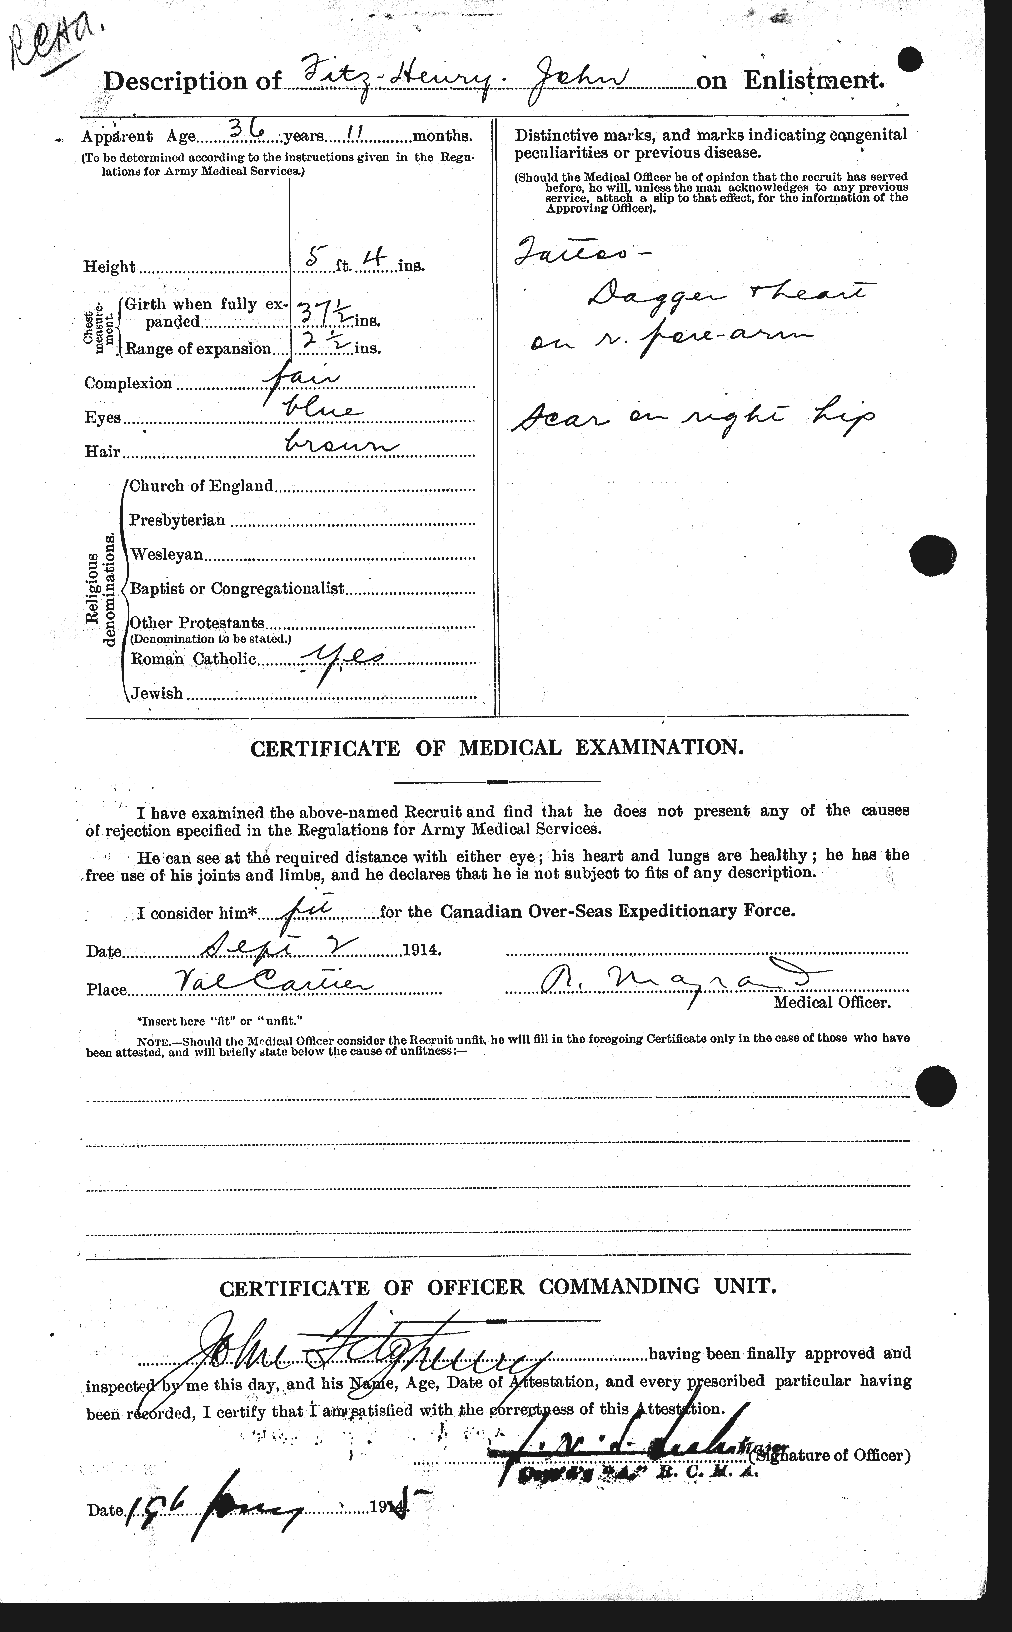 Personnel Records of the First World War - CEF 326720b